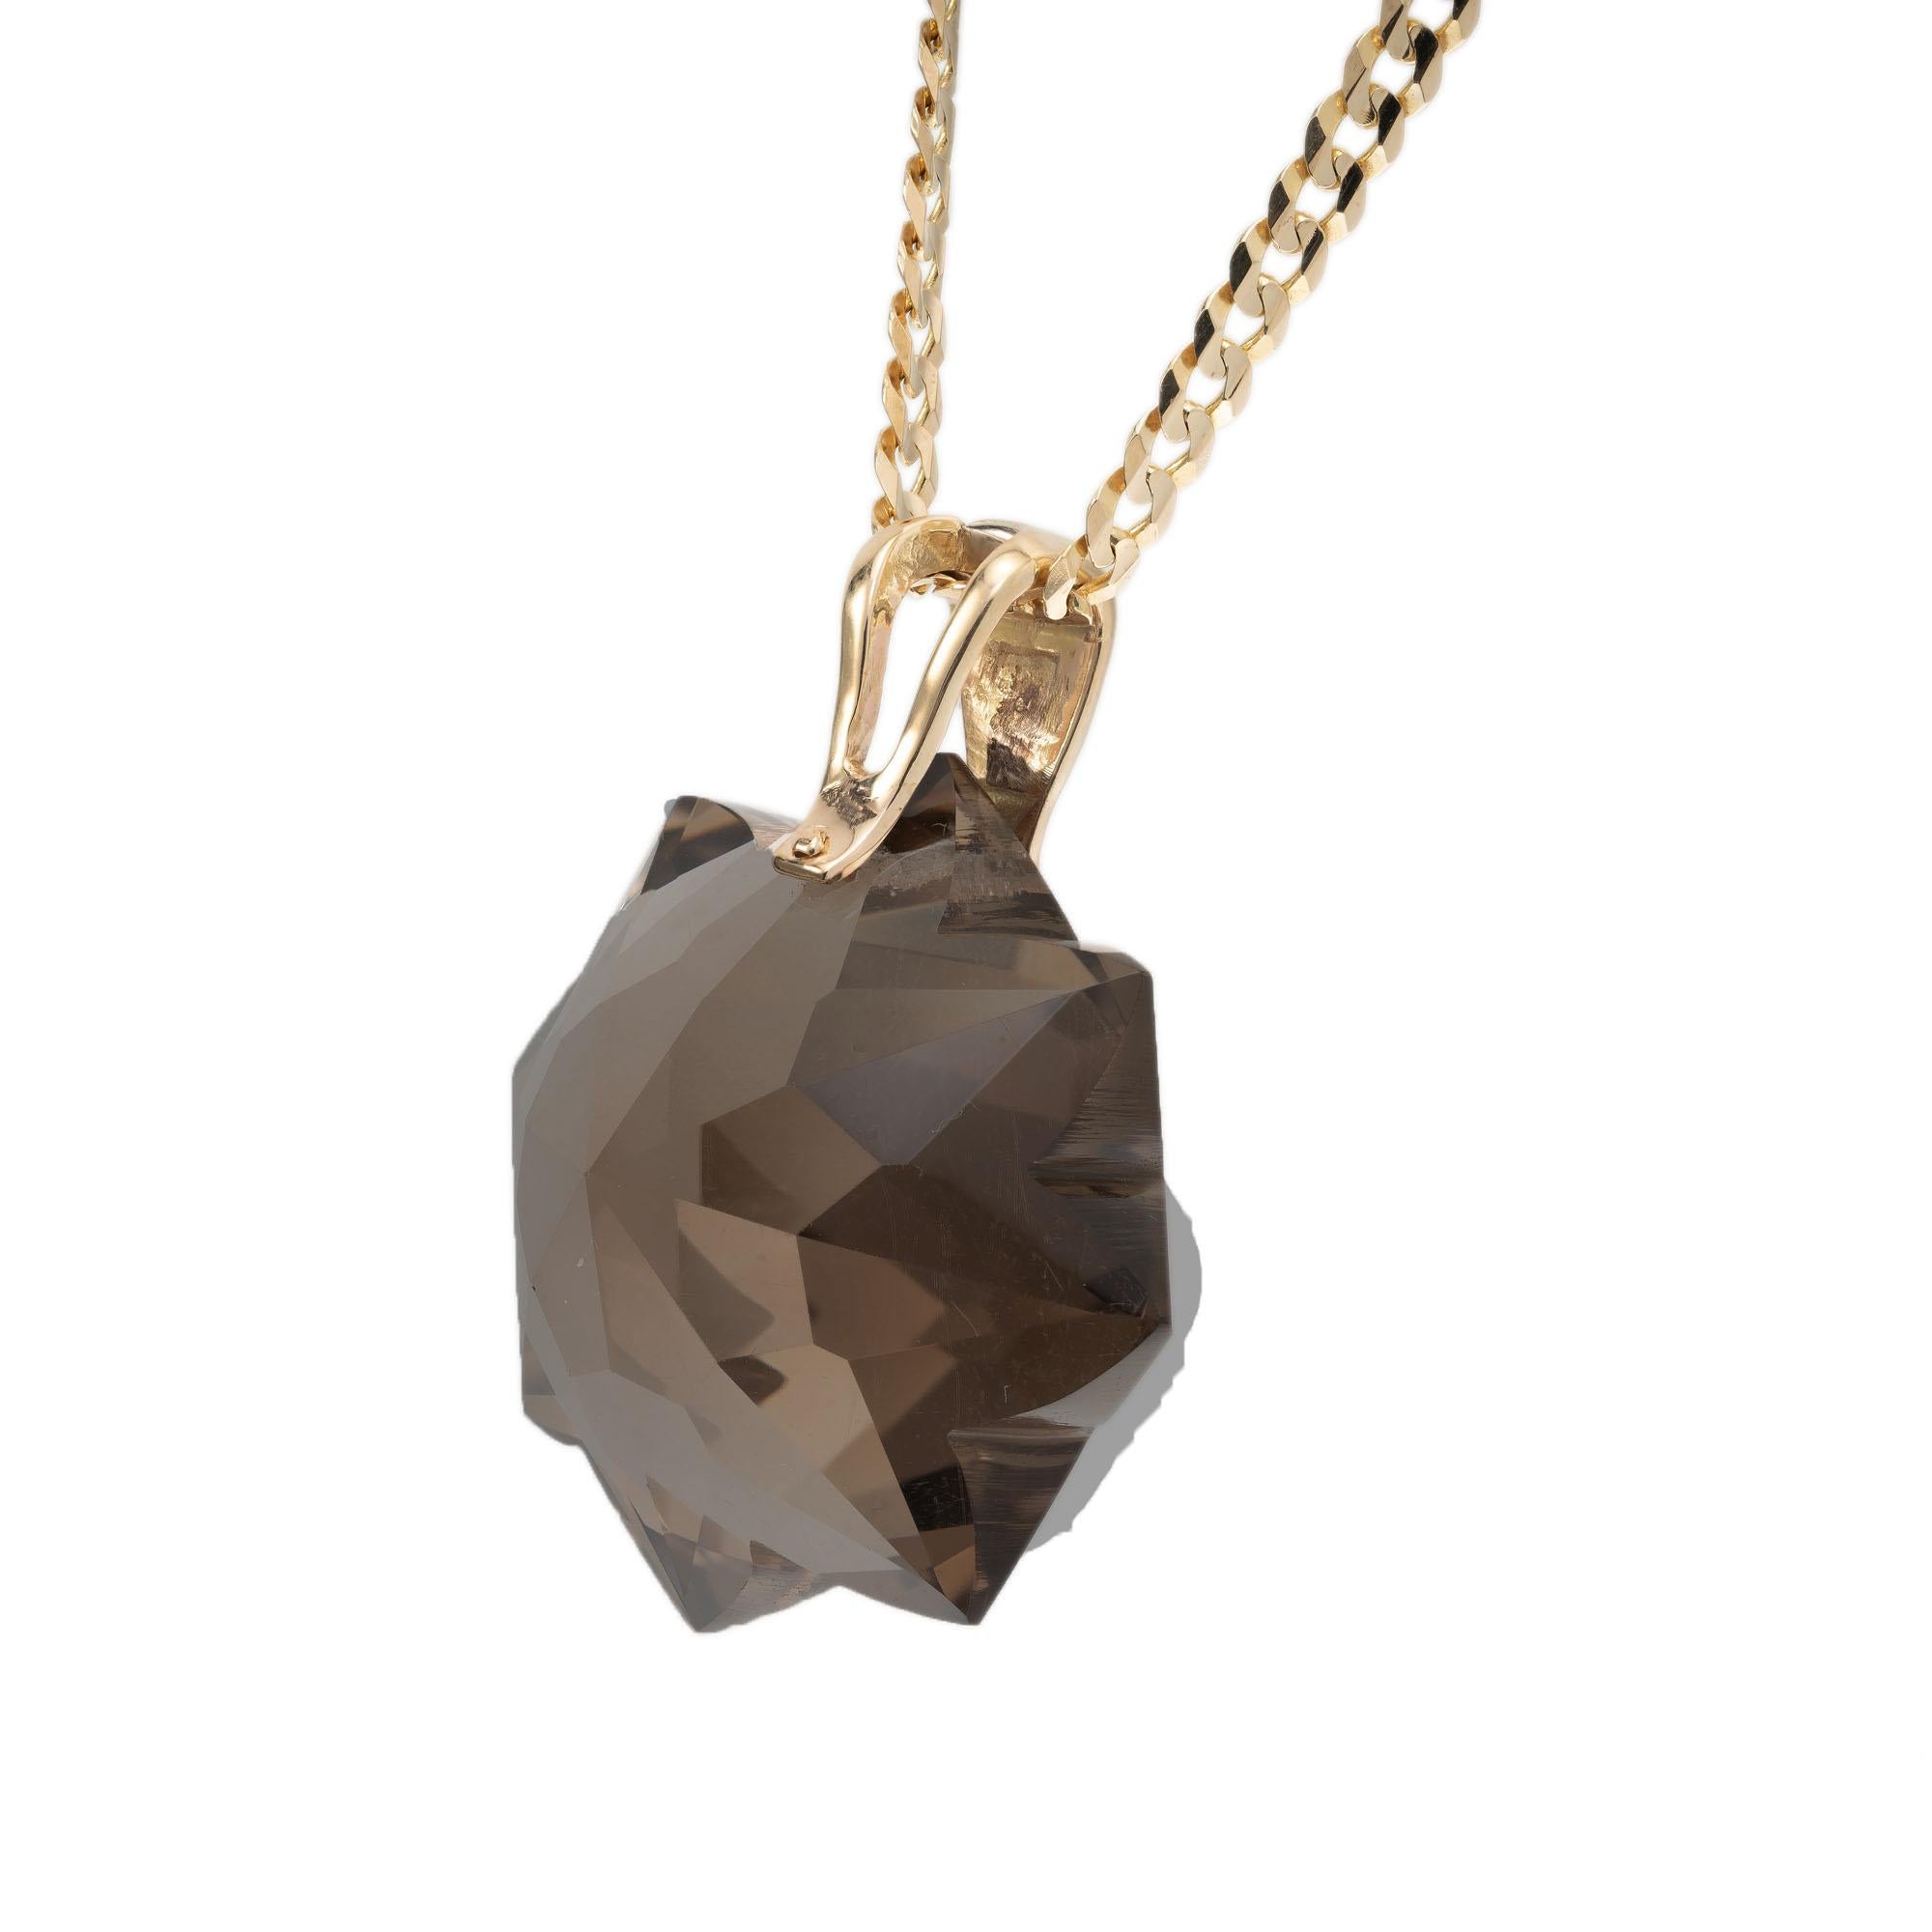 Vintage 1960's eight-pointed star cut 150.00 carat smoky quartz pendant on a 20 Inch yellow gold chain. 

1 star cut brown smoky quartz, VS approx. 150cts
14k yellow gold 
39.7 grams
Top to bottom: 46.9mm or 1 7/8 Inch
Width: 37.7mm or 1.5